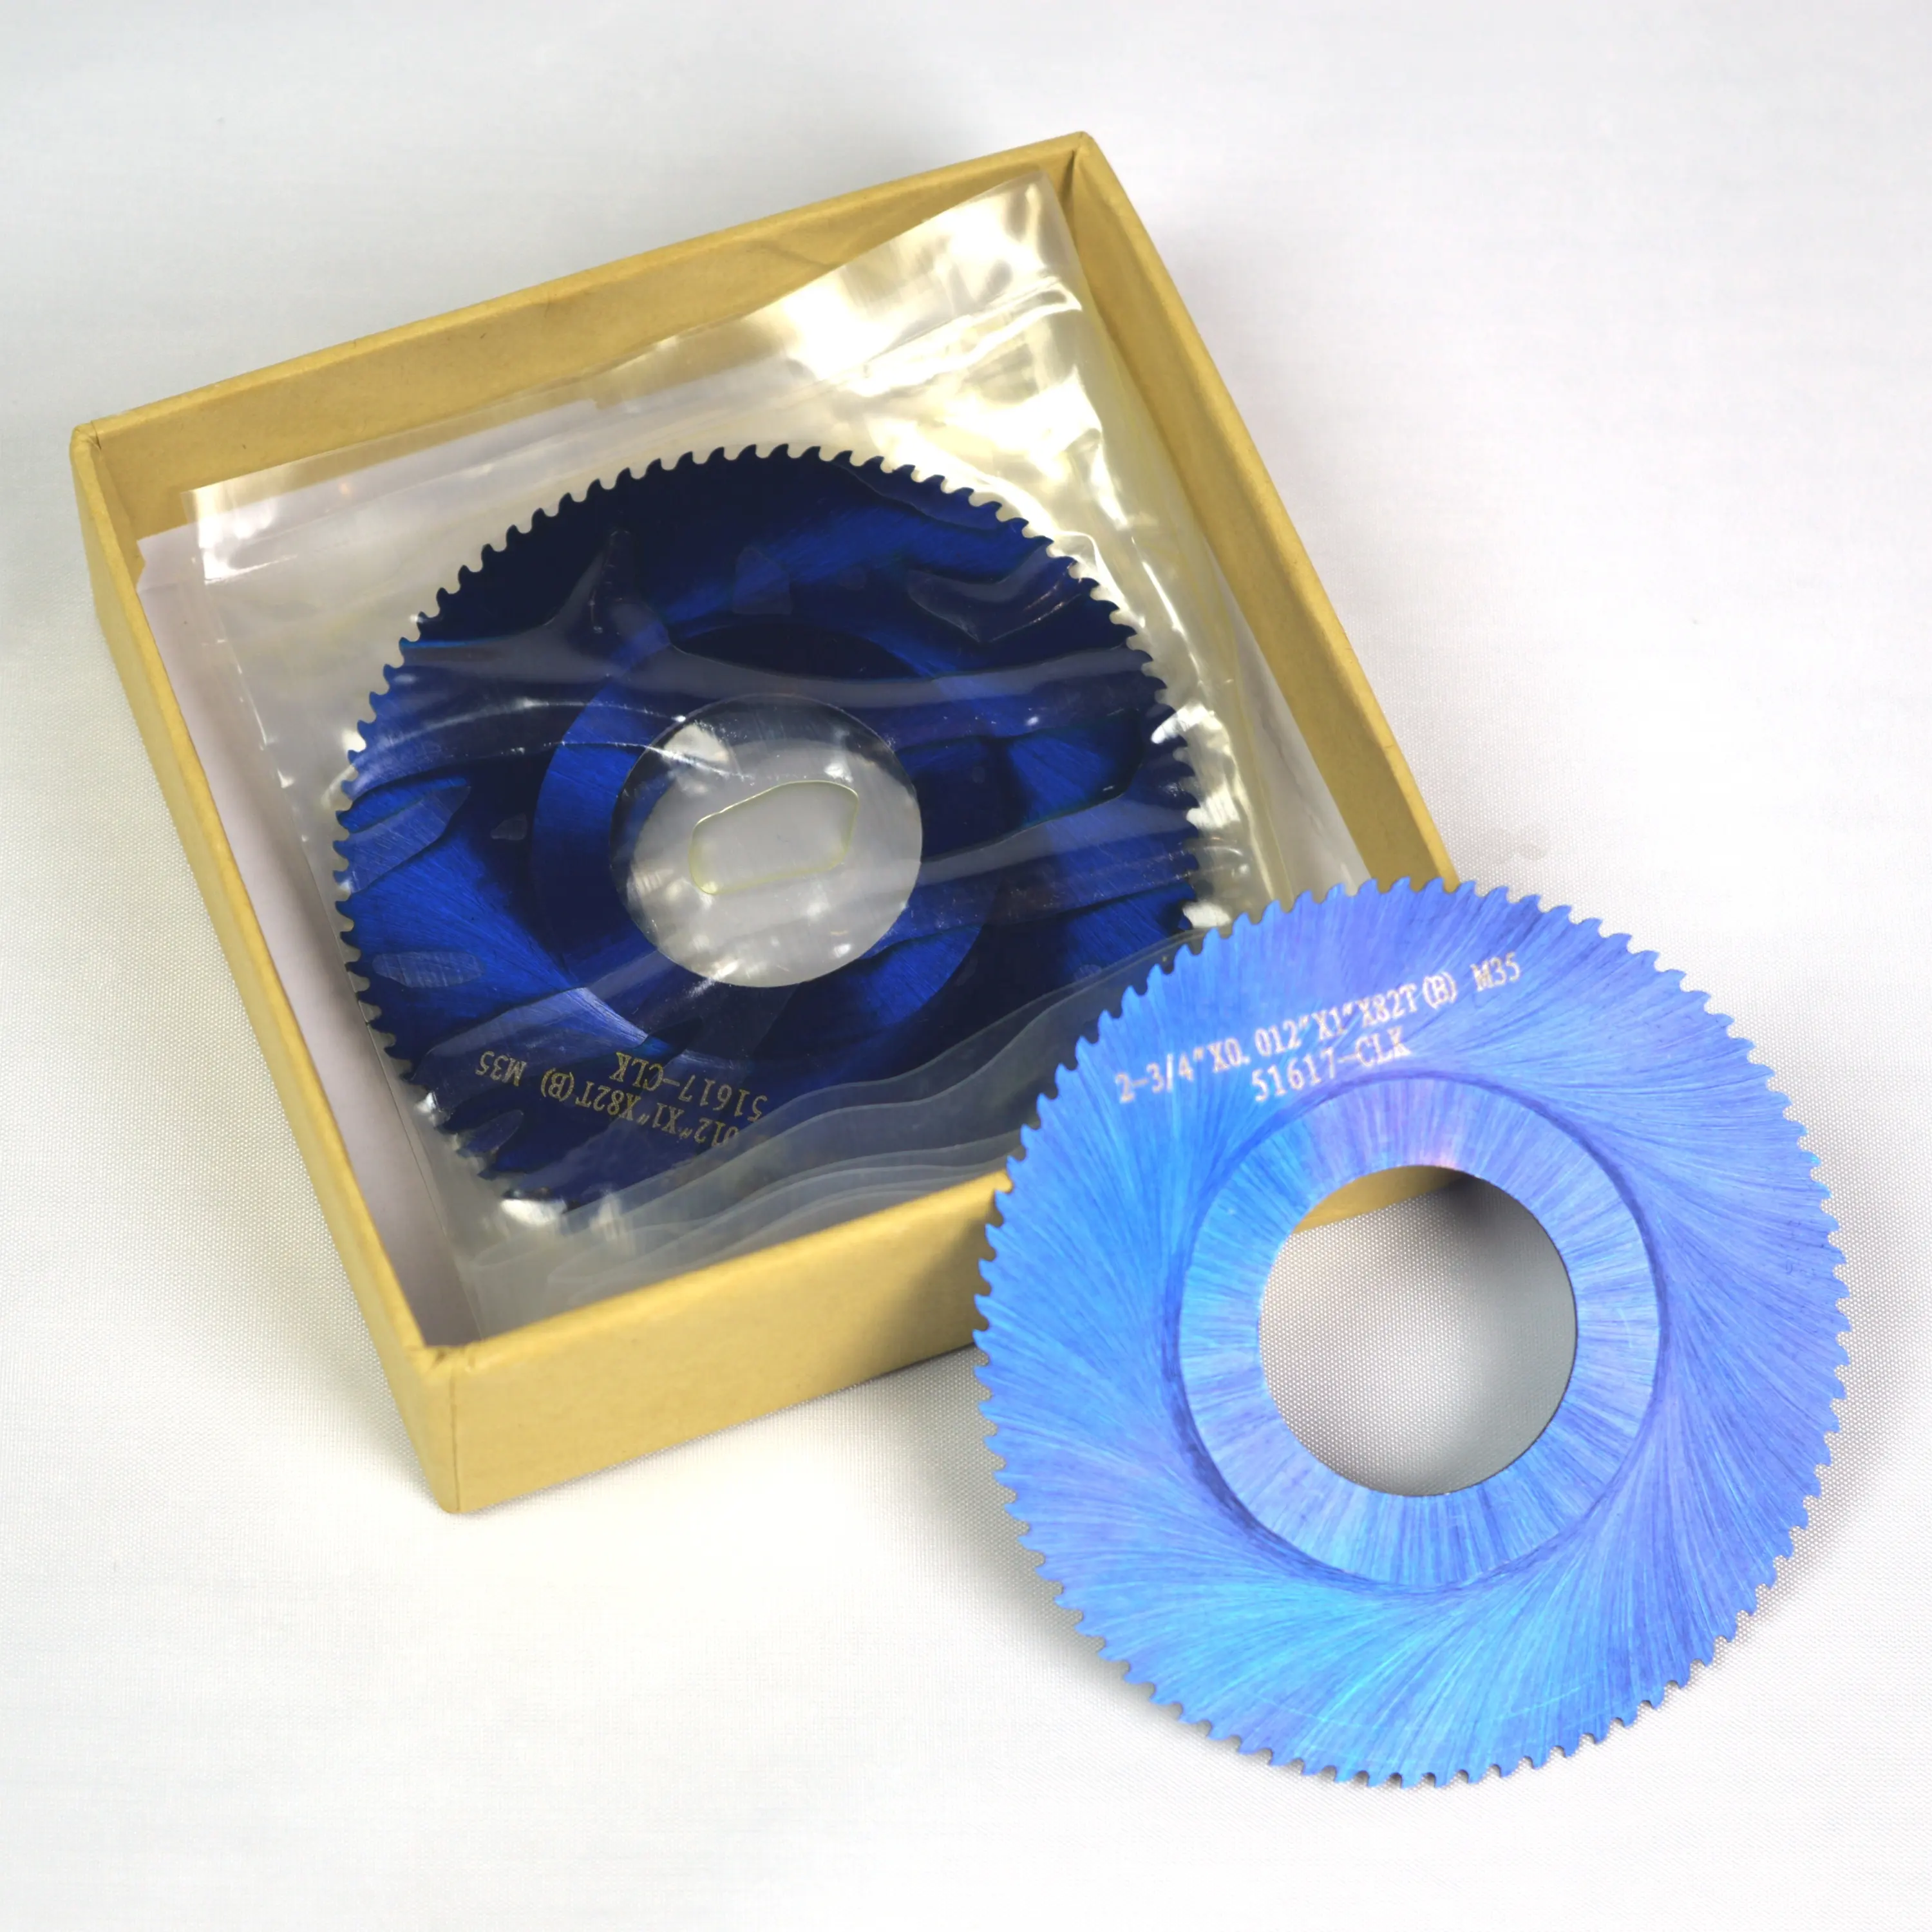 M35 2-3/4" Top Rated HSS Circular Slitting Saw Blade Cutter For Multiple Cutting